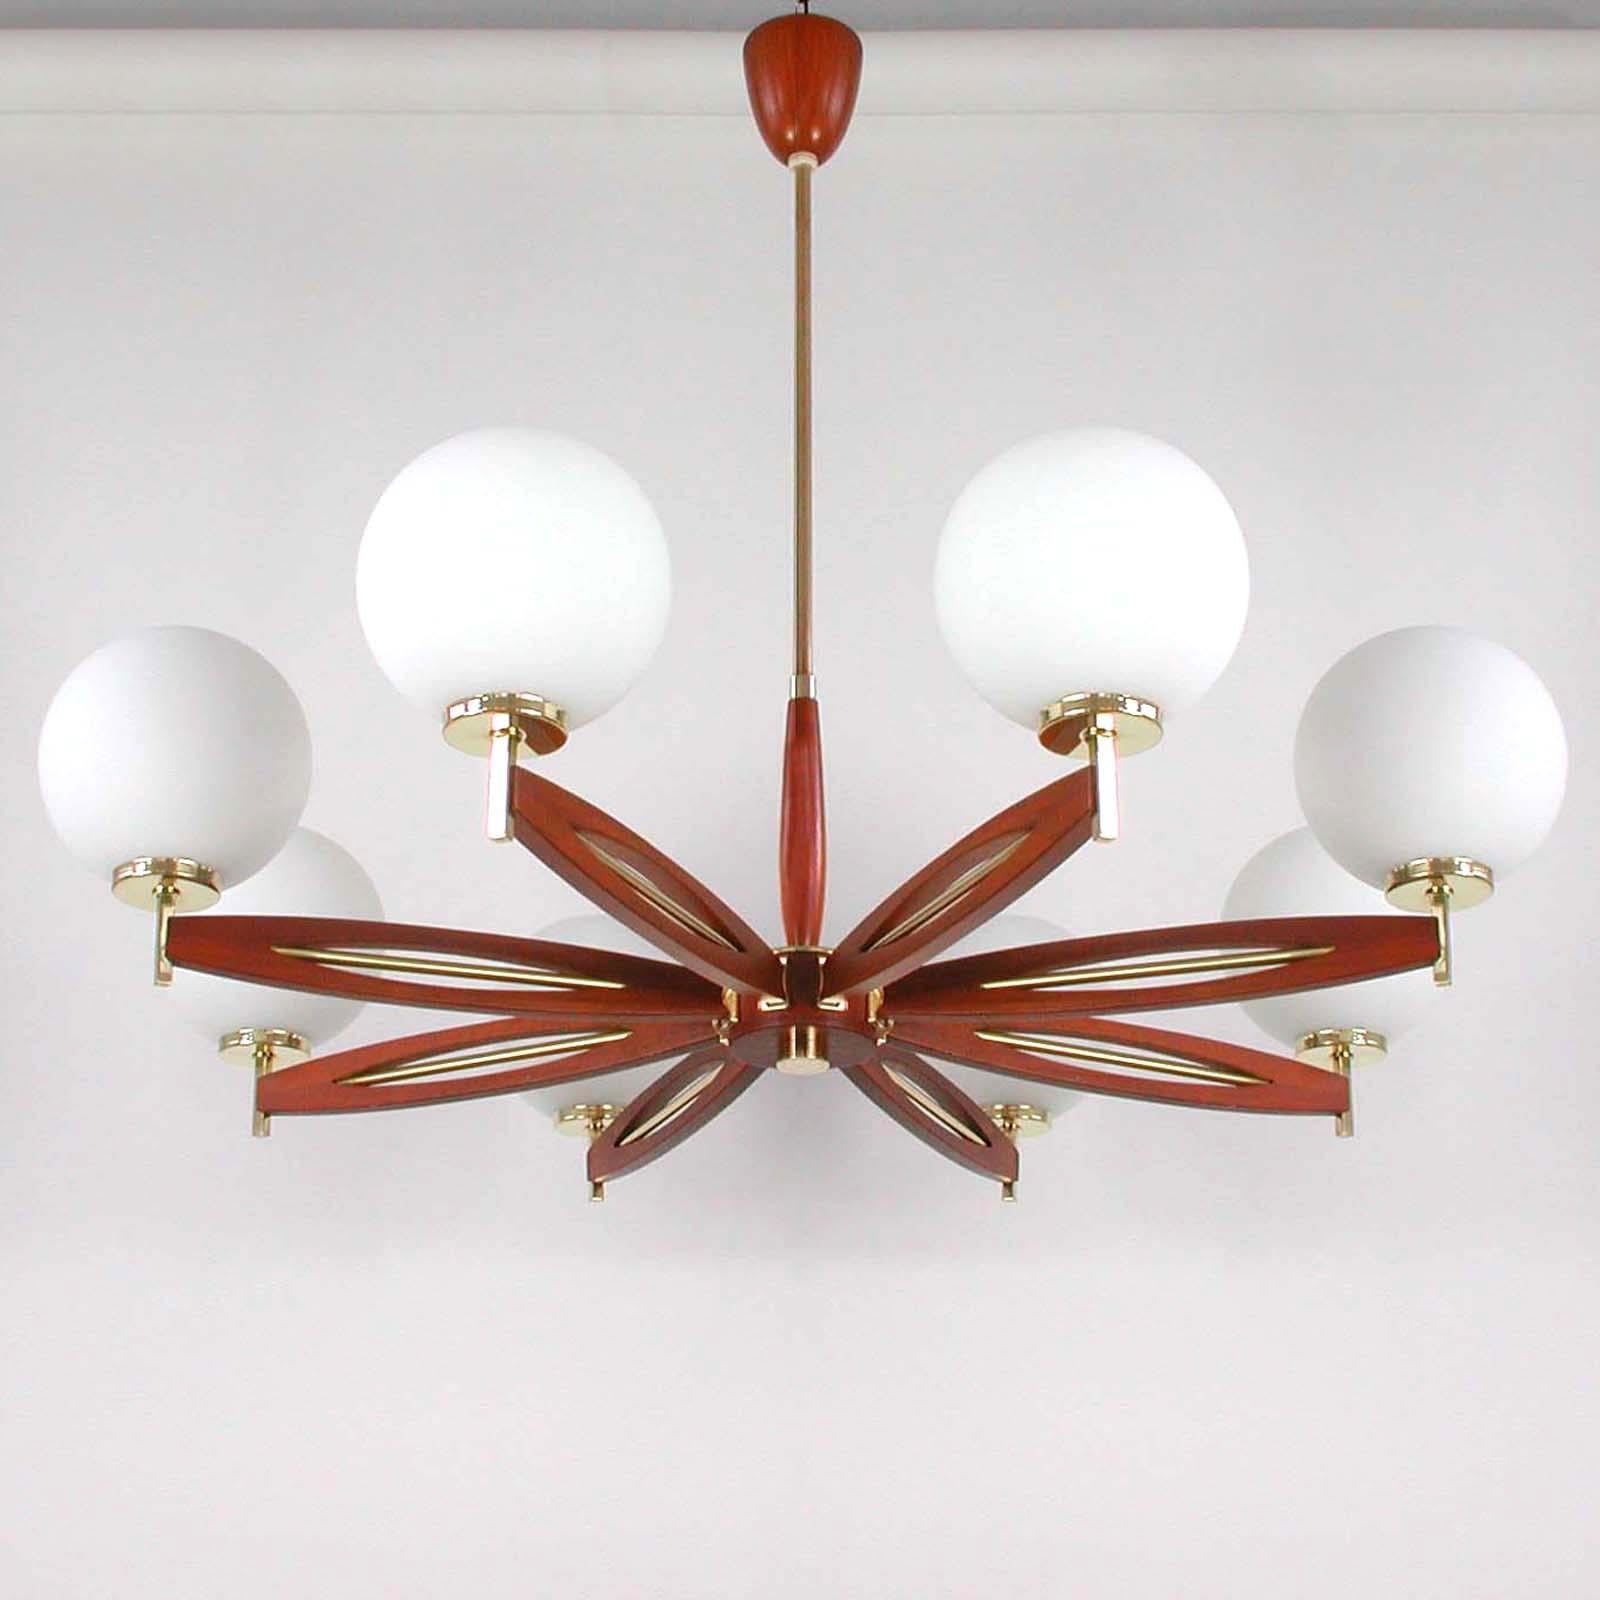 This sputnik eight-light chandelier was manufactured in Denmark in the late 1950s-early 1960s. It is made of brass and teak and has got eight satin opal glass lampshades.

Condition is very good and the lamp is in full working order, cleaned and